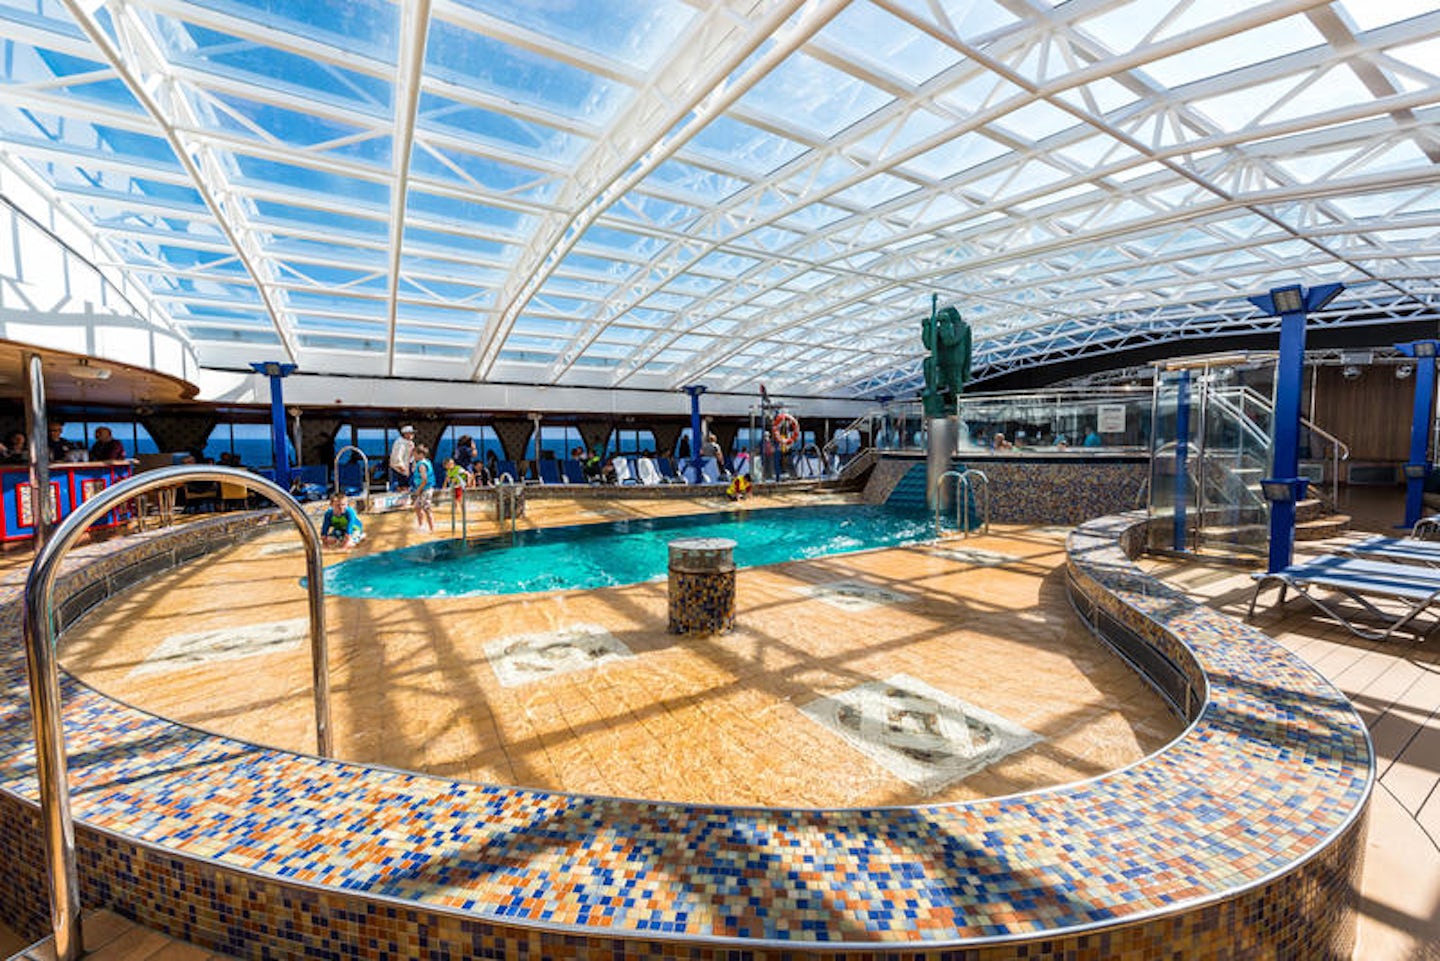 The Avalon Main Pool on Carnival Legend